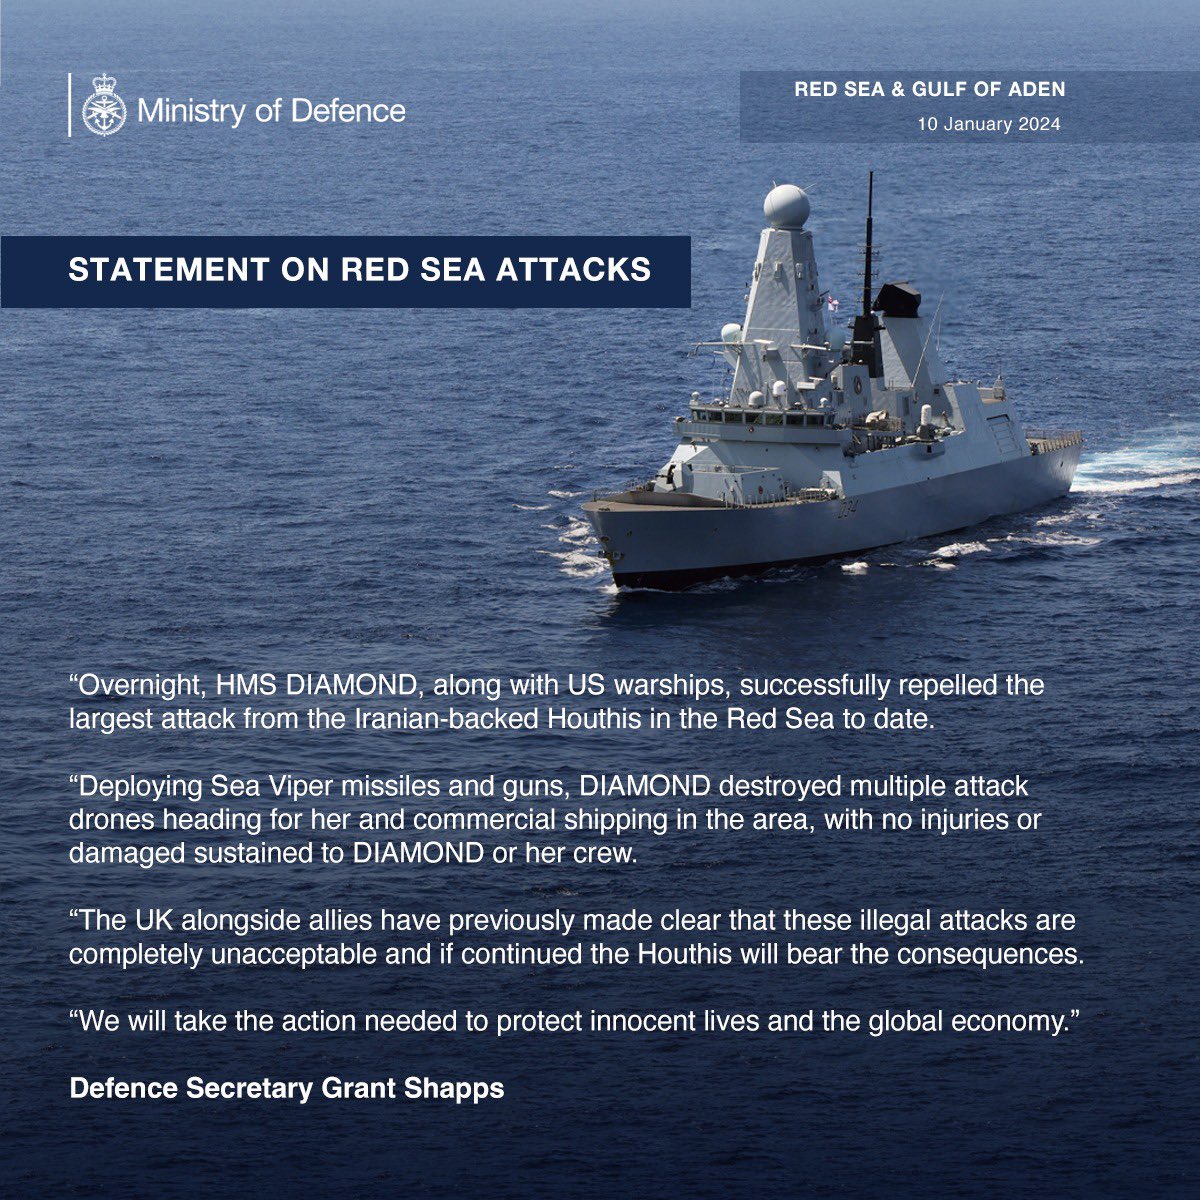 HMS DIAMOND, along with US warships, has repelled the largest attack by the Iranian-backed Houthis in the Red Sea to date. Destroying multiple attack drones with her guns and sea viper missiles.